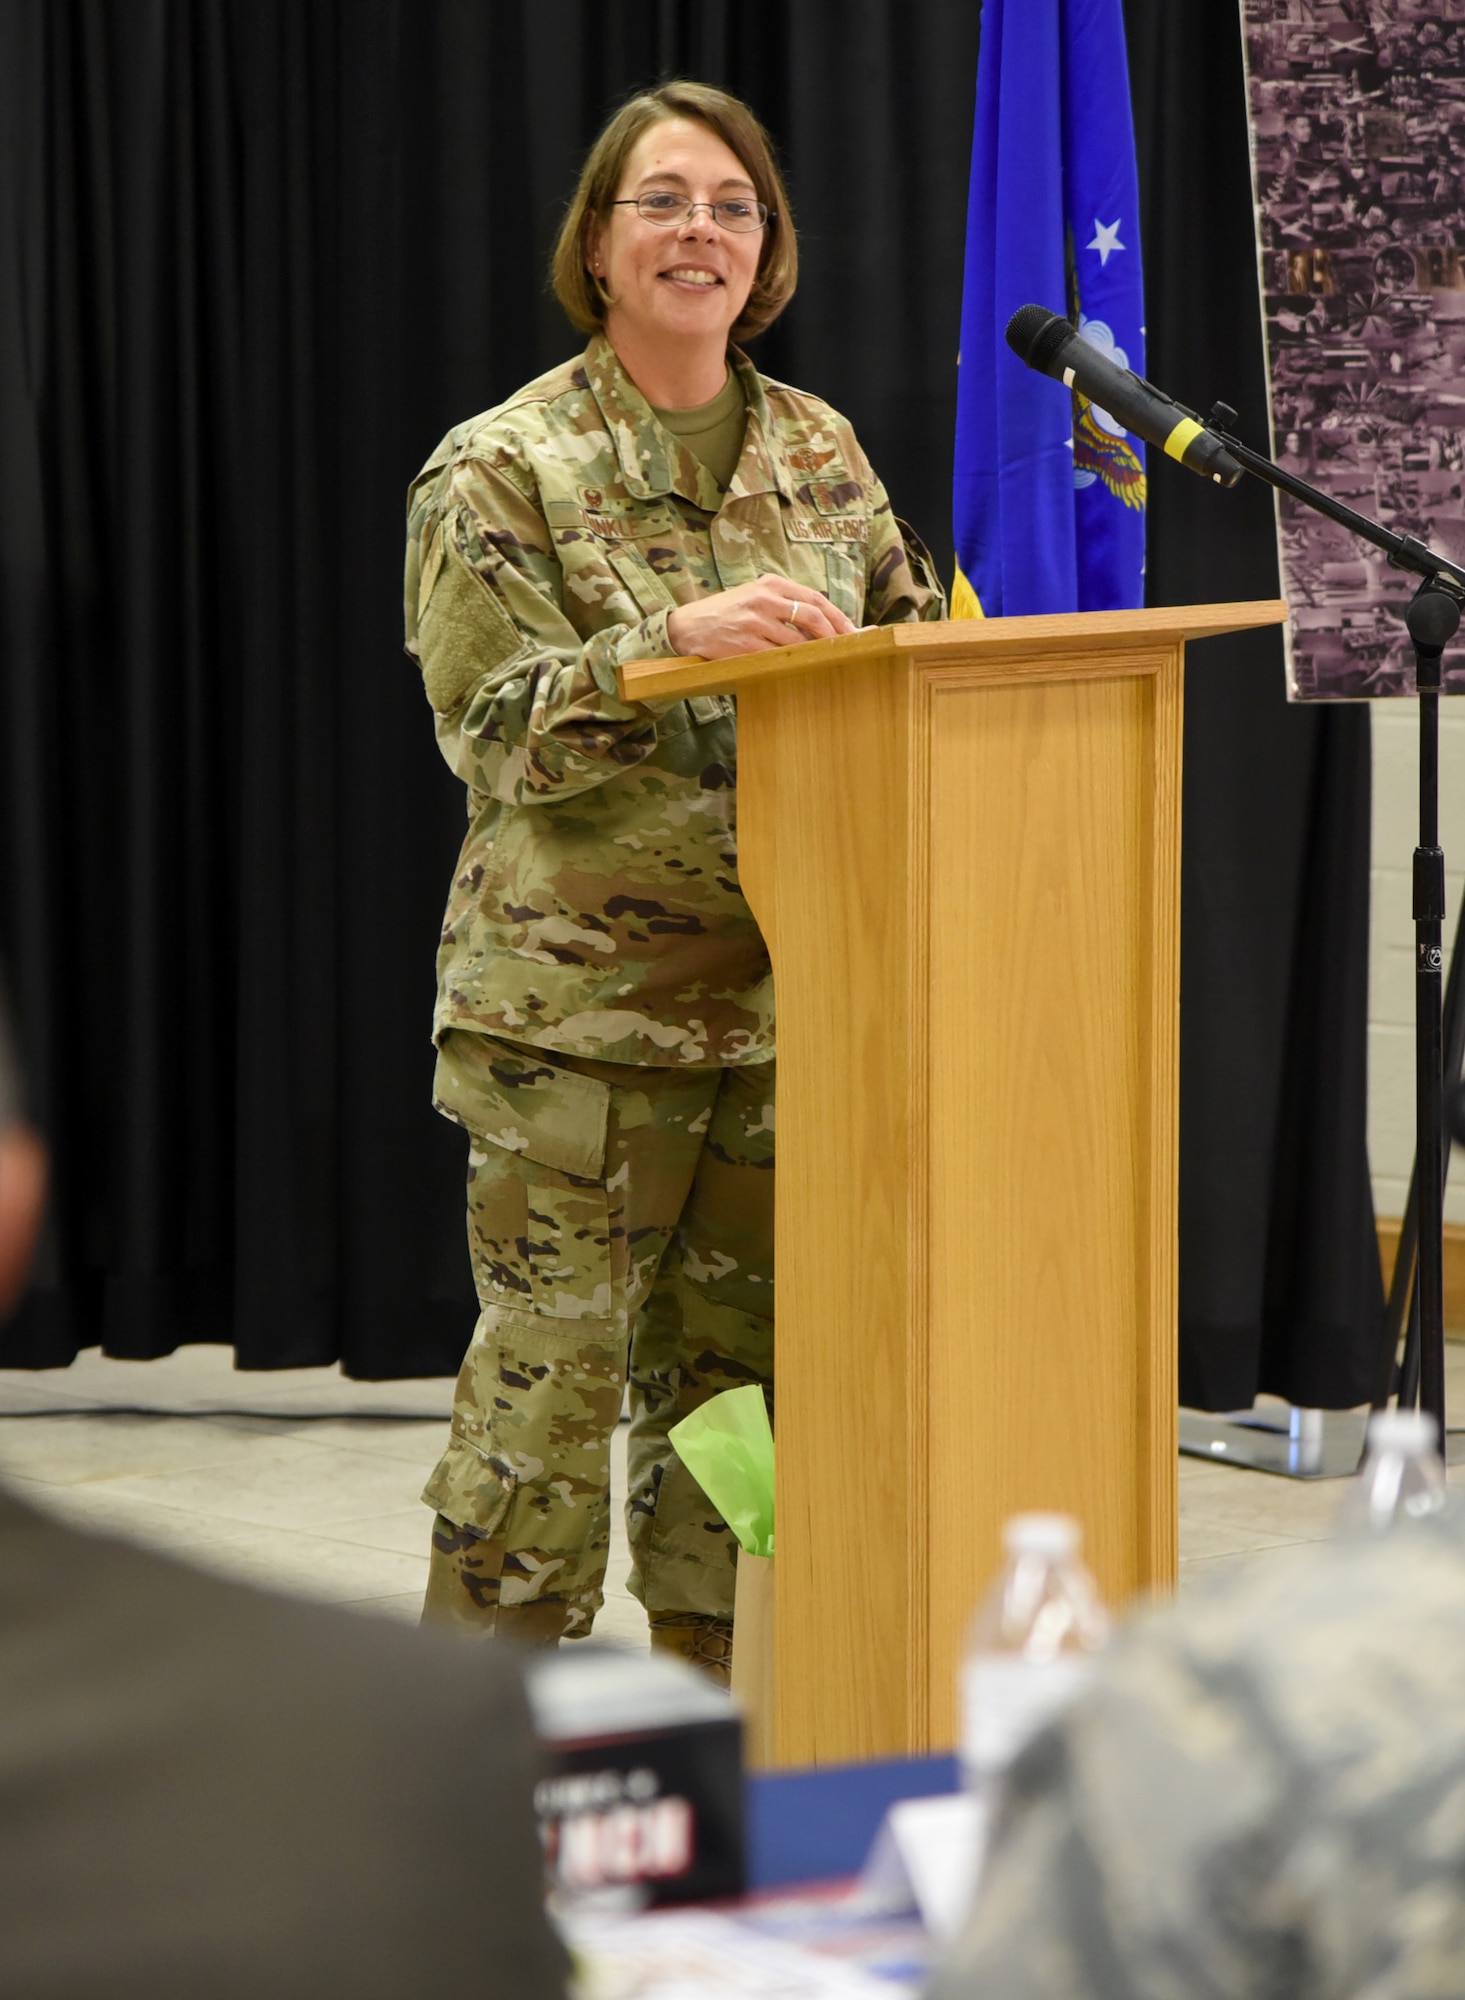 72nd Medical Group Commander Col. Jennifer Trinkle was the featured guest speaker at the Women's Equality Day Luncheon at the Tinker Chapel Aug. 26. The day commemorates the passage of the 19th Amendment to the Constitution, guaranteeing women's right to vote. (U.S. Air Force photo/Kelly White)